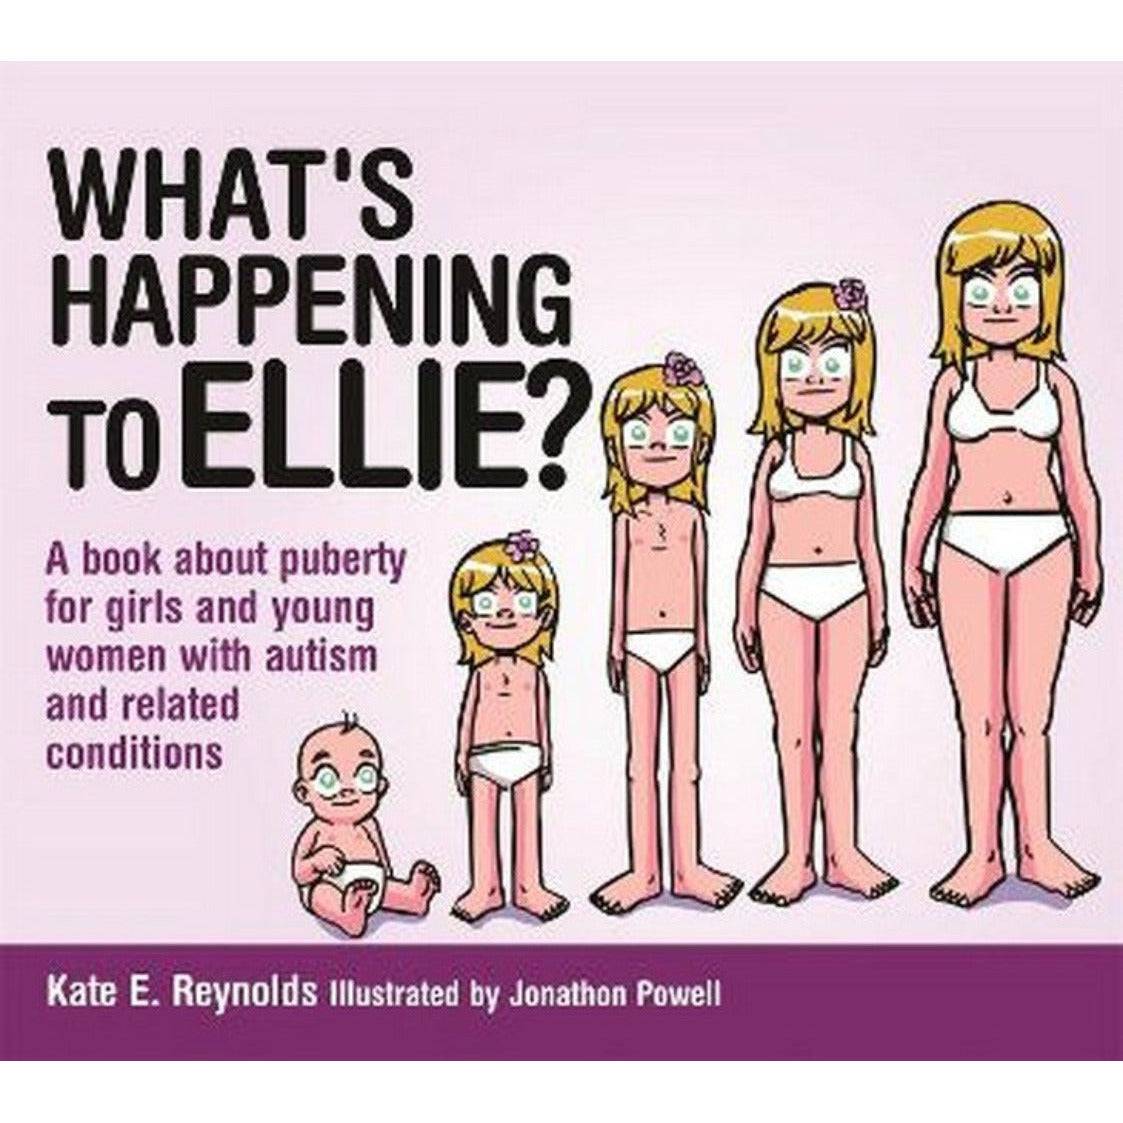 What's Happening to Ellie?: A book about puberty for girls and young women with autism and related conditions - Sensory Circle